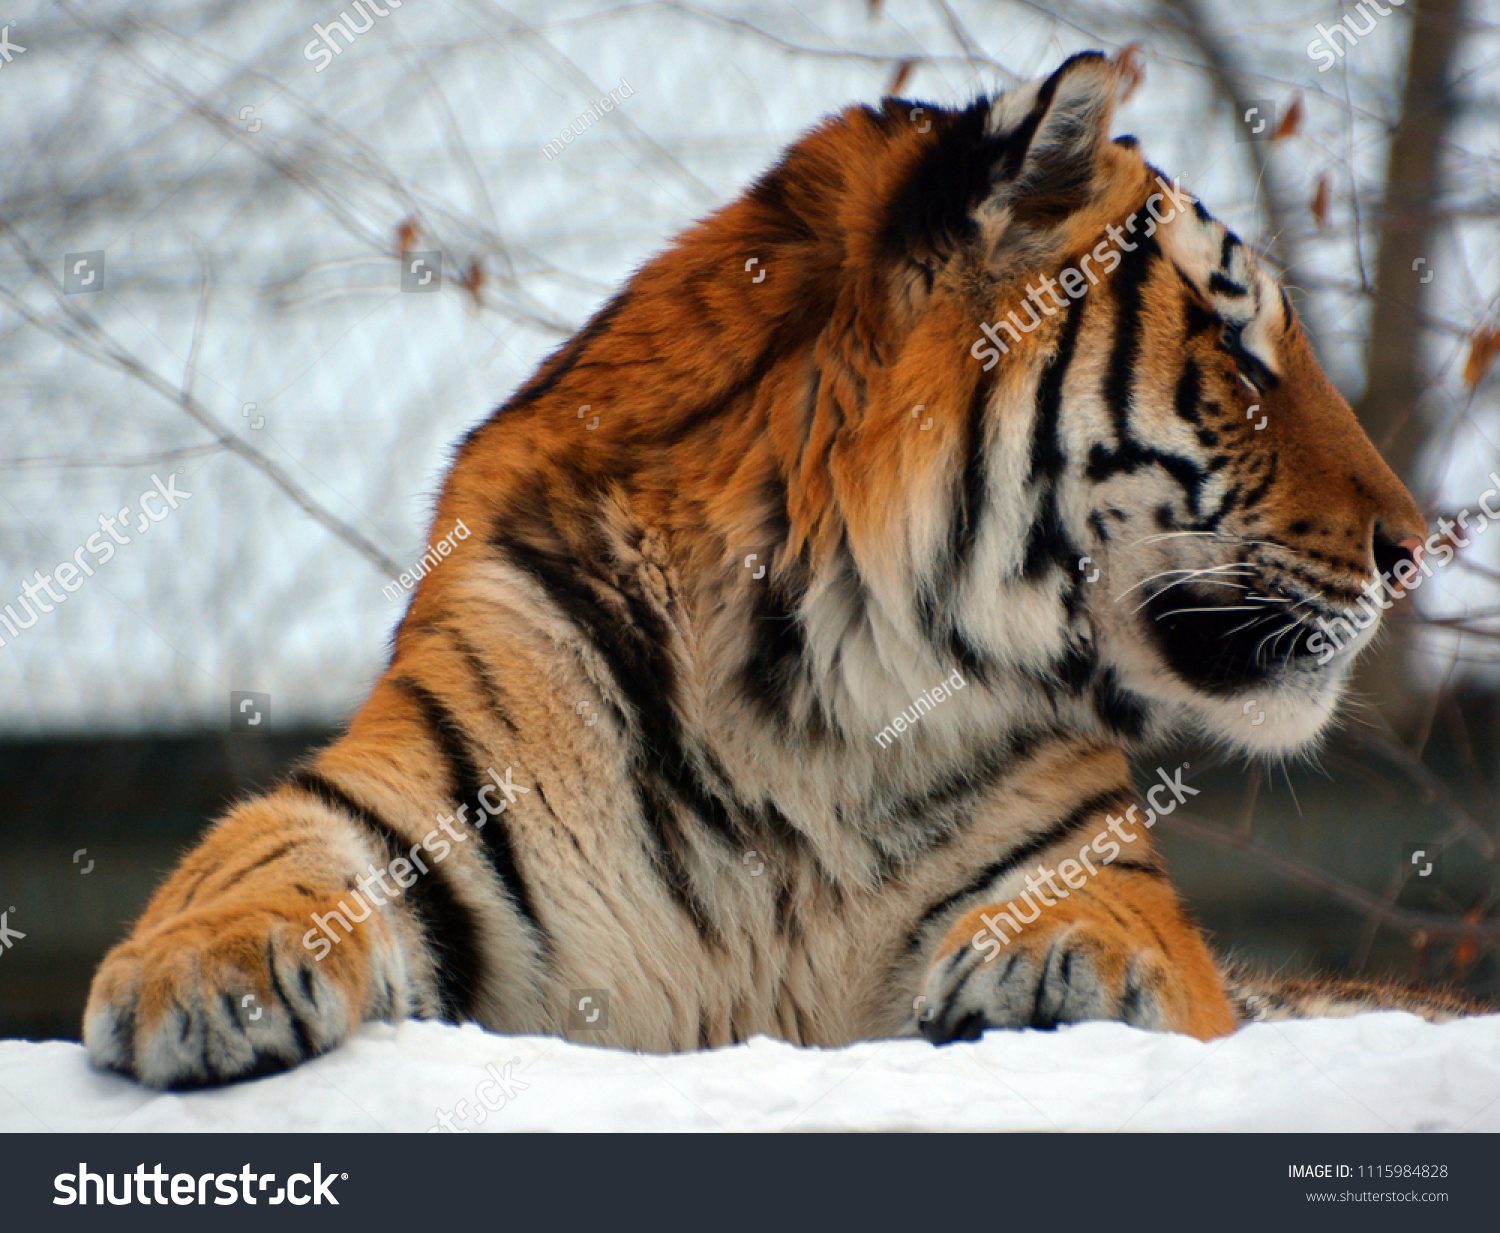 Tiger close up: The tiger (Panthera tigris) is the largest cat species. It is the third largest land carnivore (behind only the polar bear and the brown bear). #1115984828